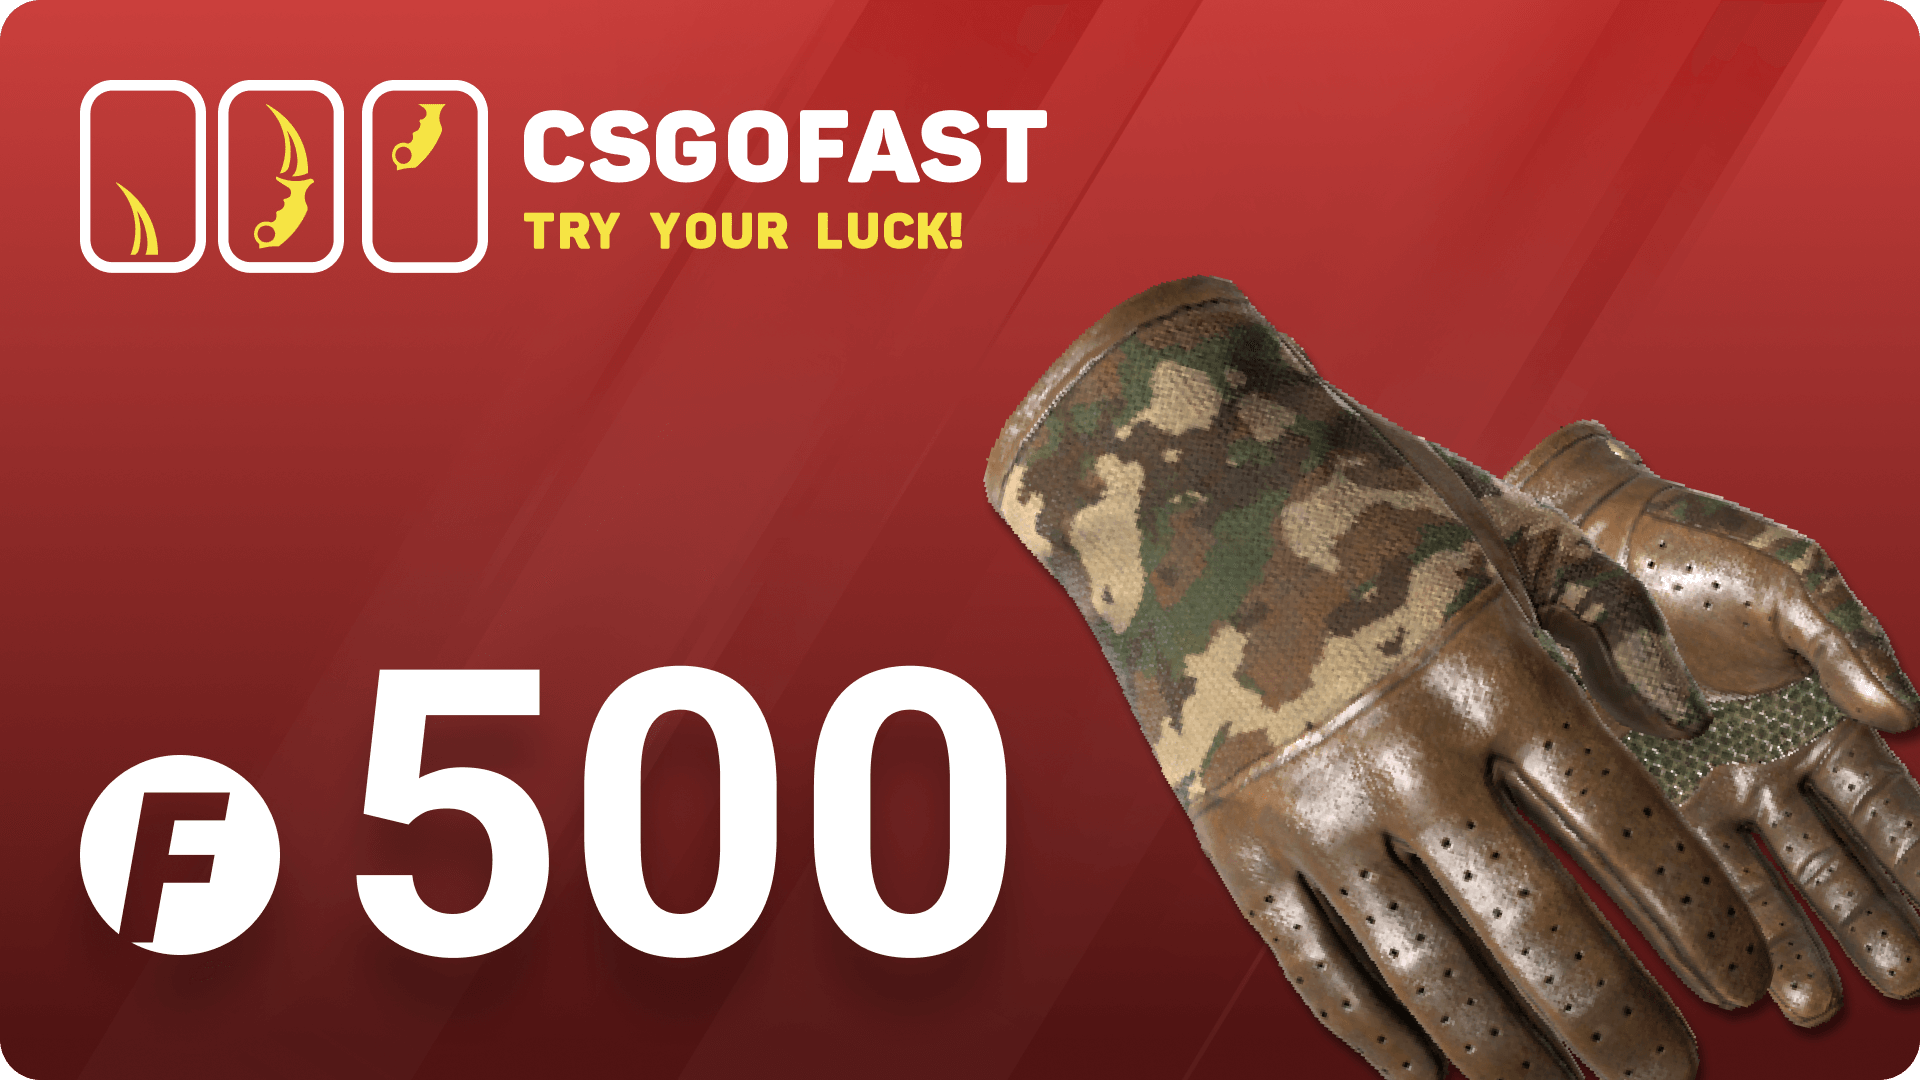 (353.1$) CSGOFAST 500 Fast Coins Gift Card